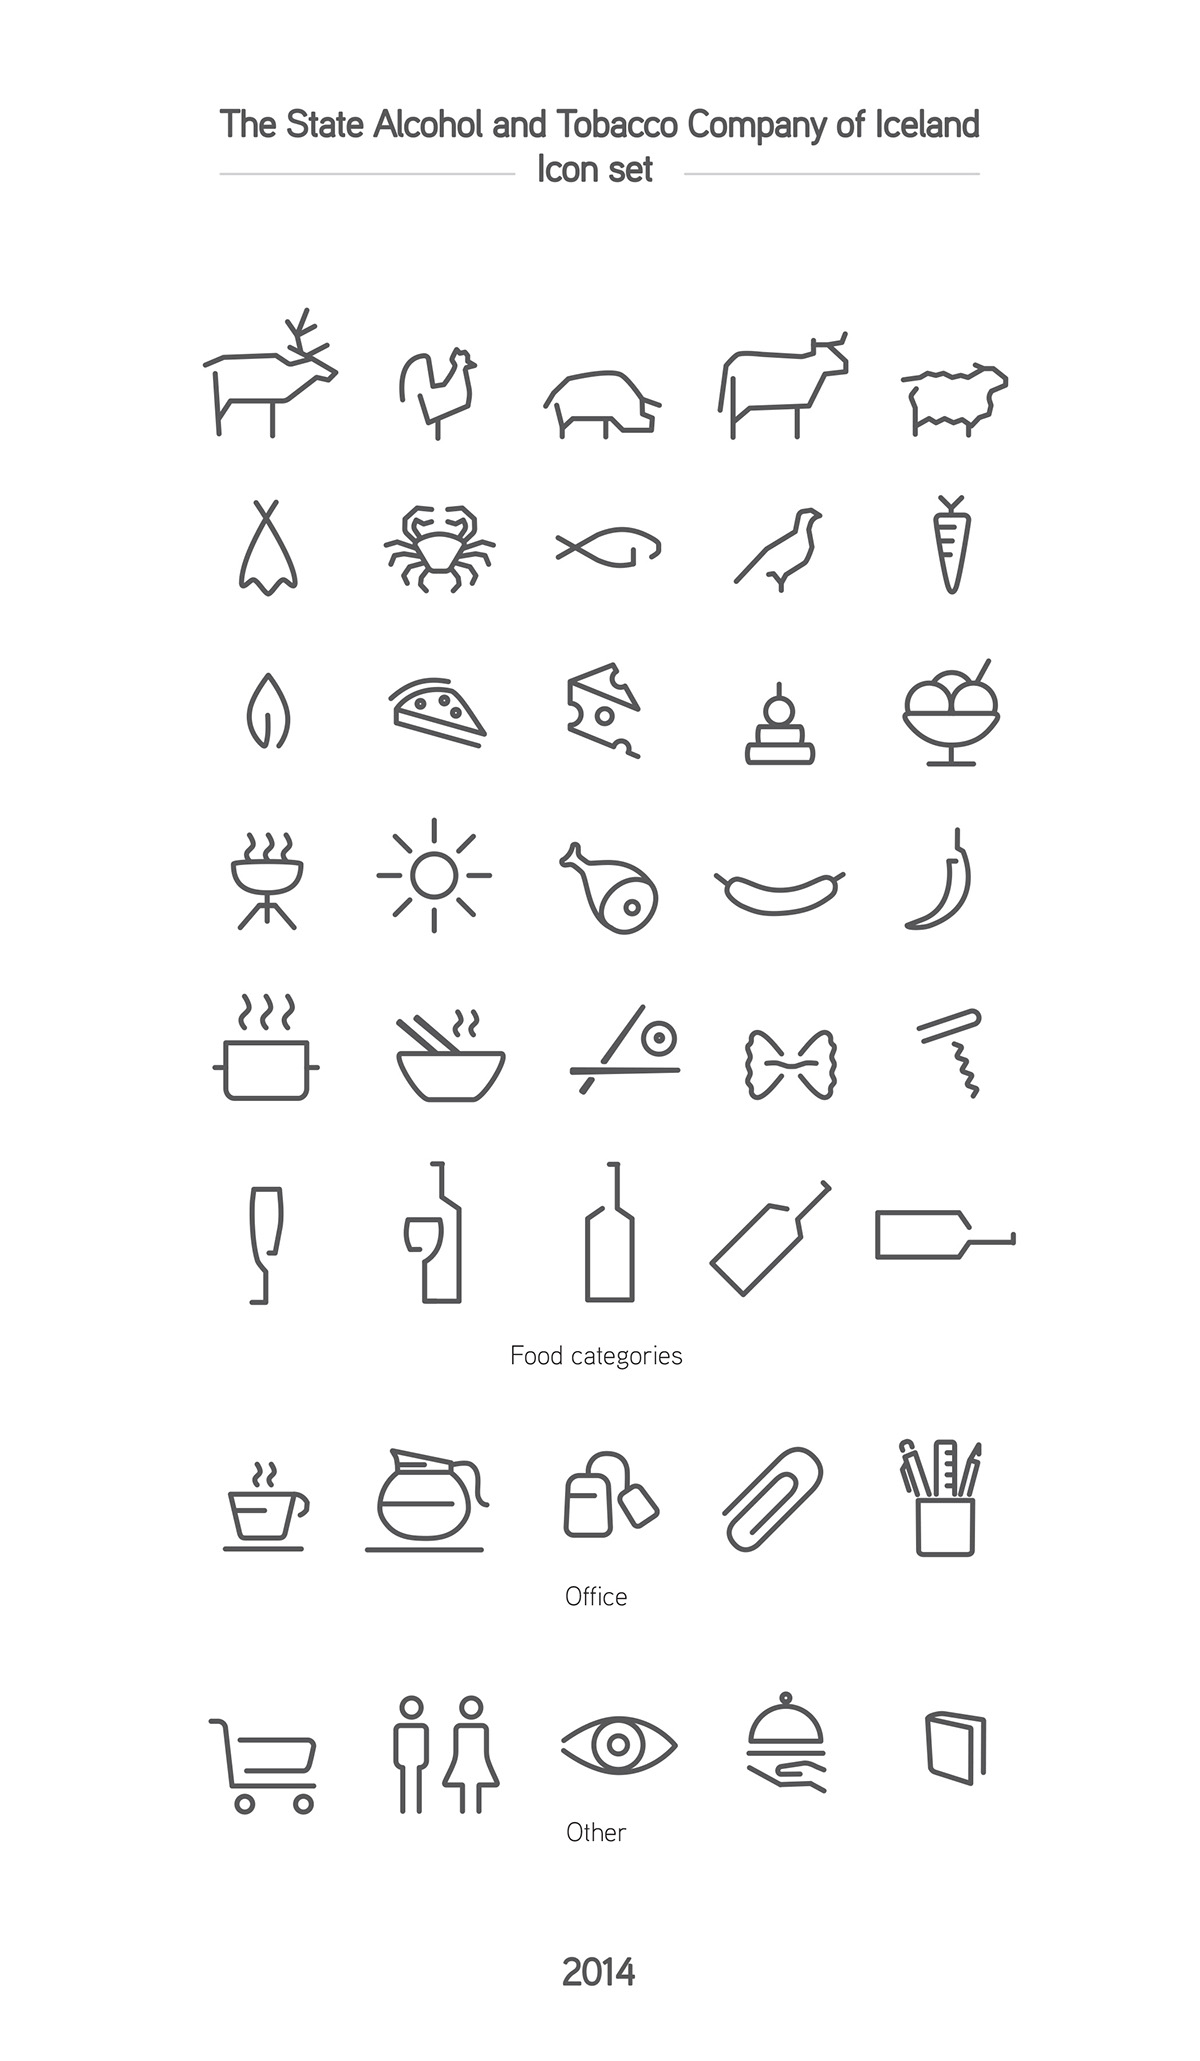 store icons animal animals drawings state alcohol iceland deer Rooster Coffee pen gray grey wc chili